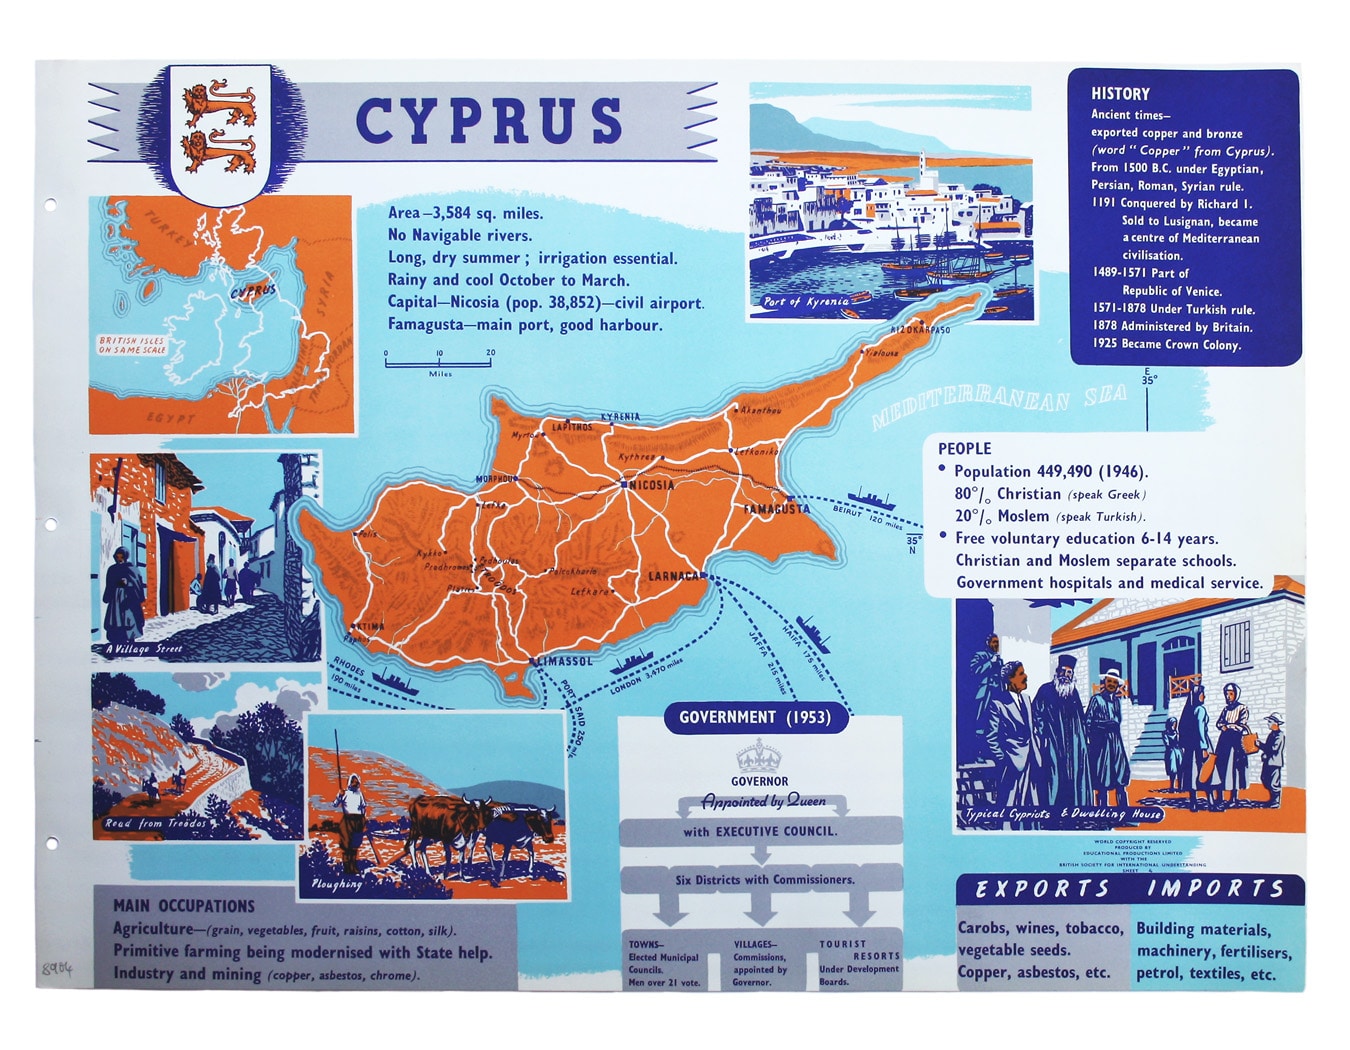 The Empire Information Project Map of Cyprus